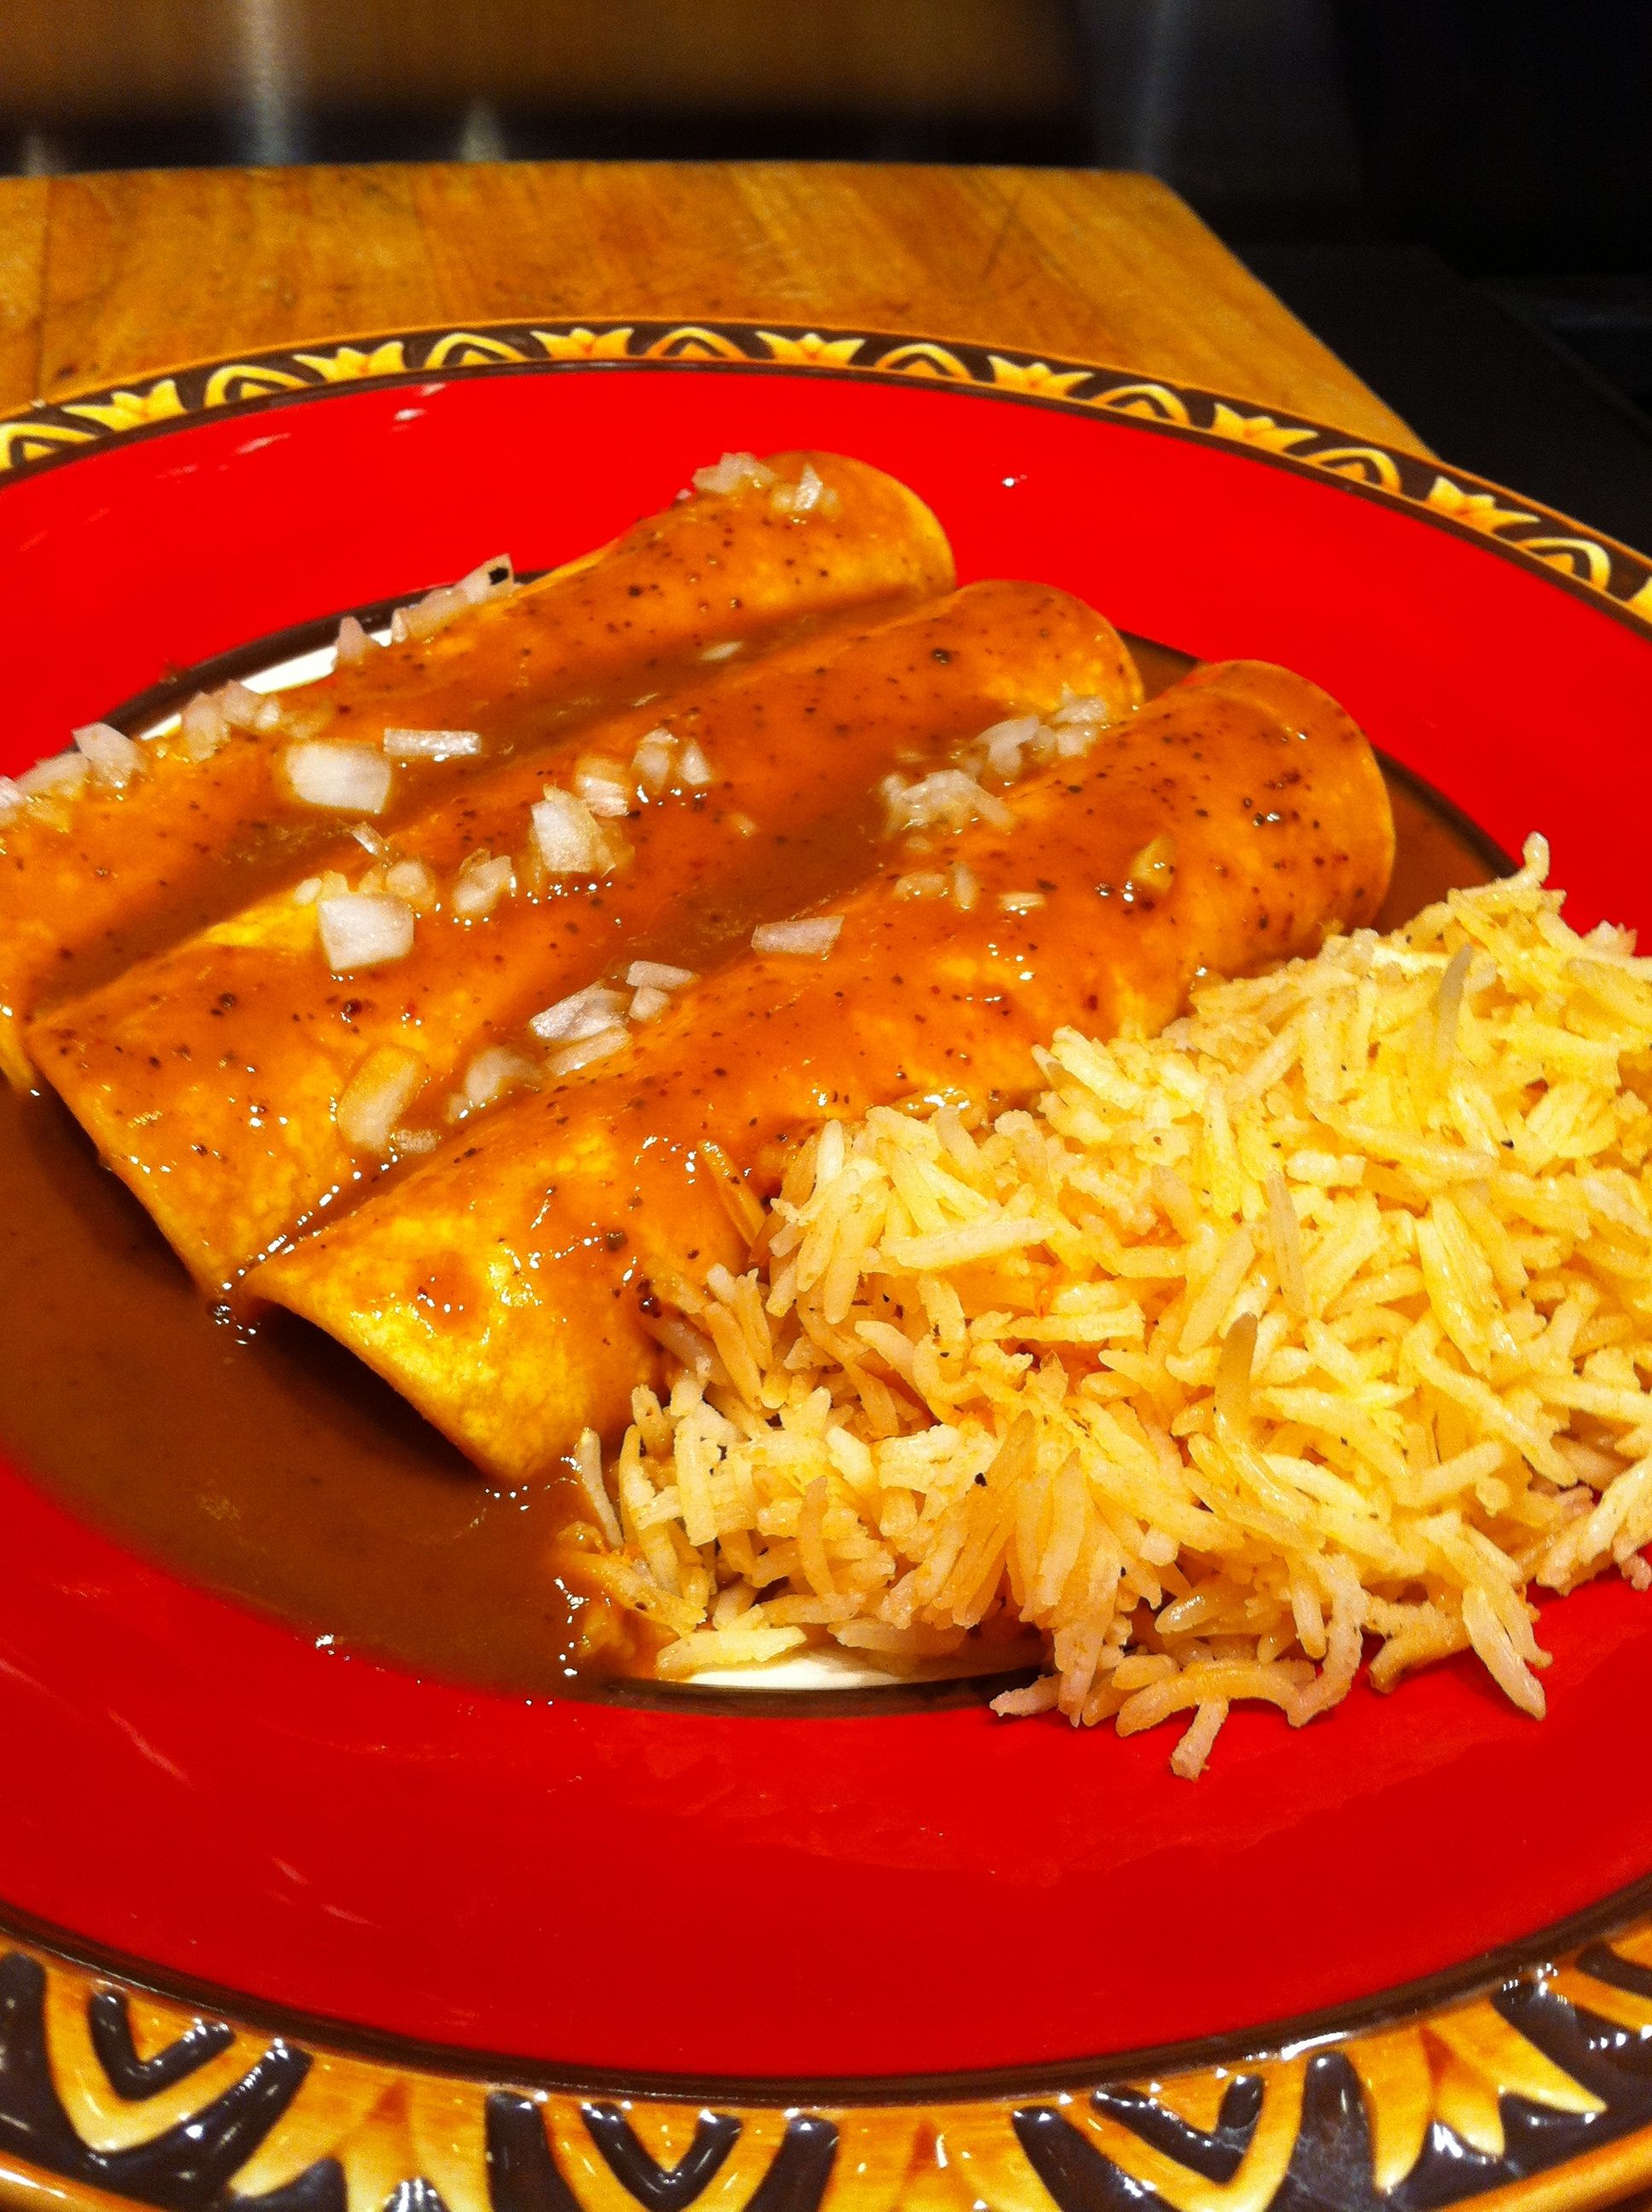 Cheese enchilada made with two chiles: Ancho and Pasilla